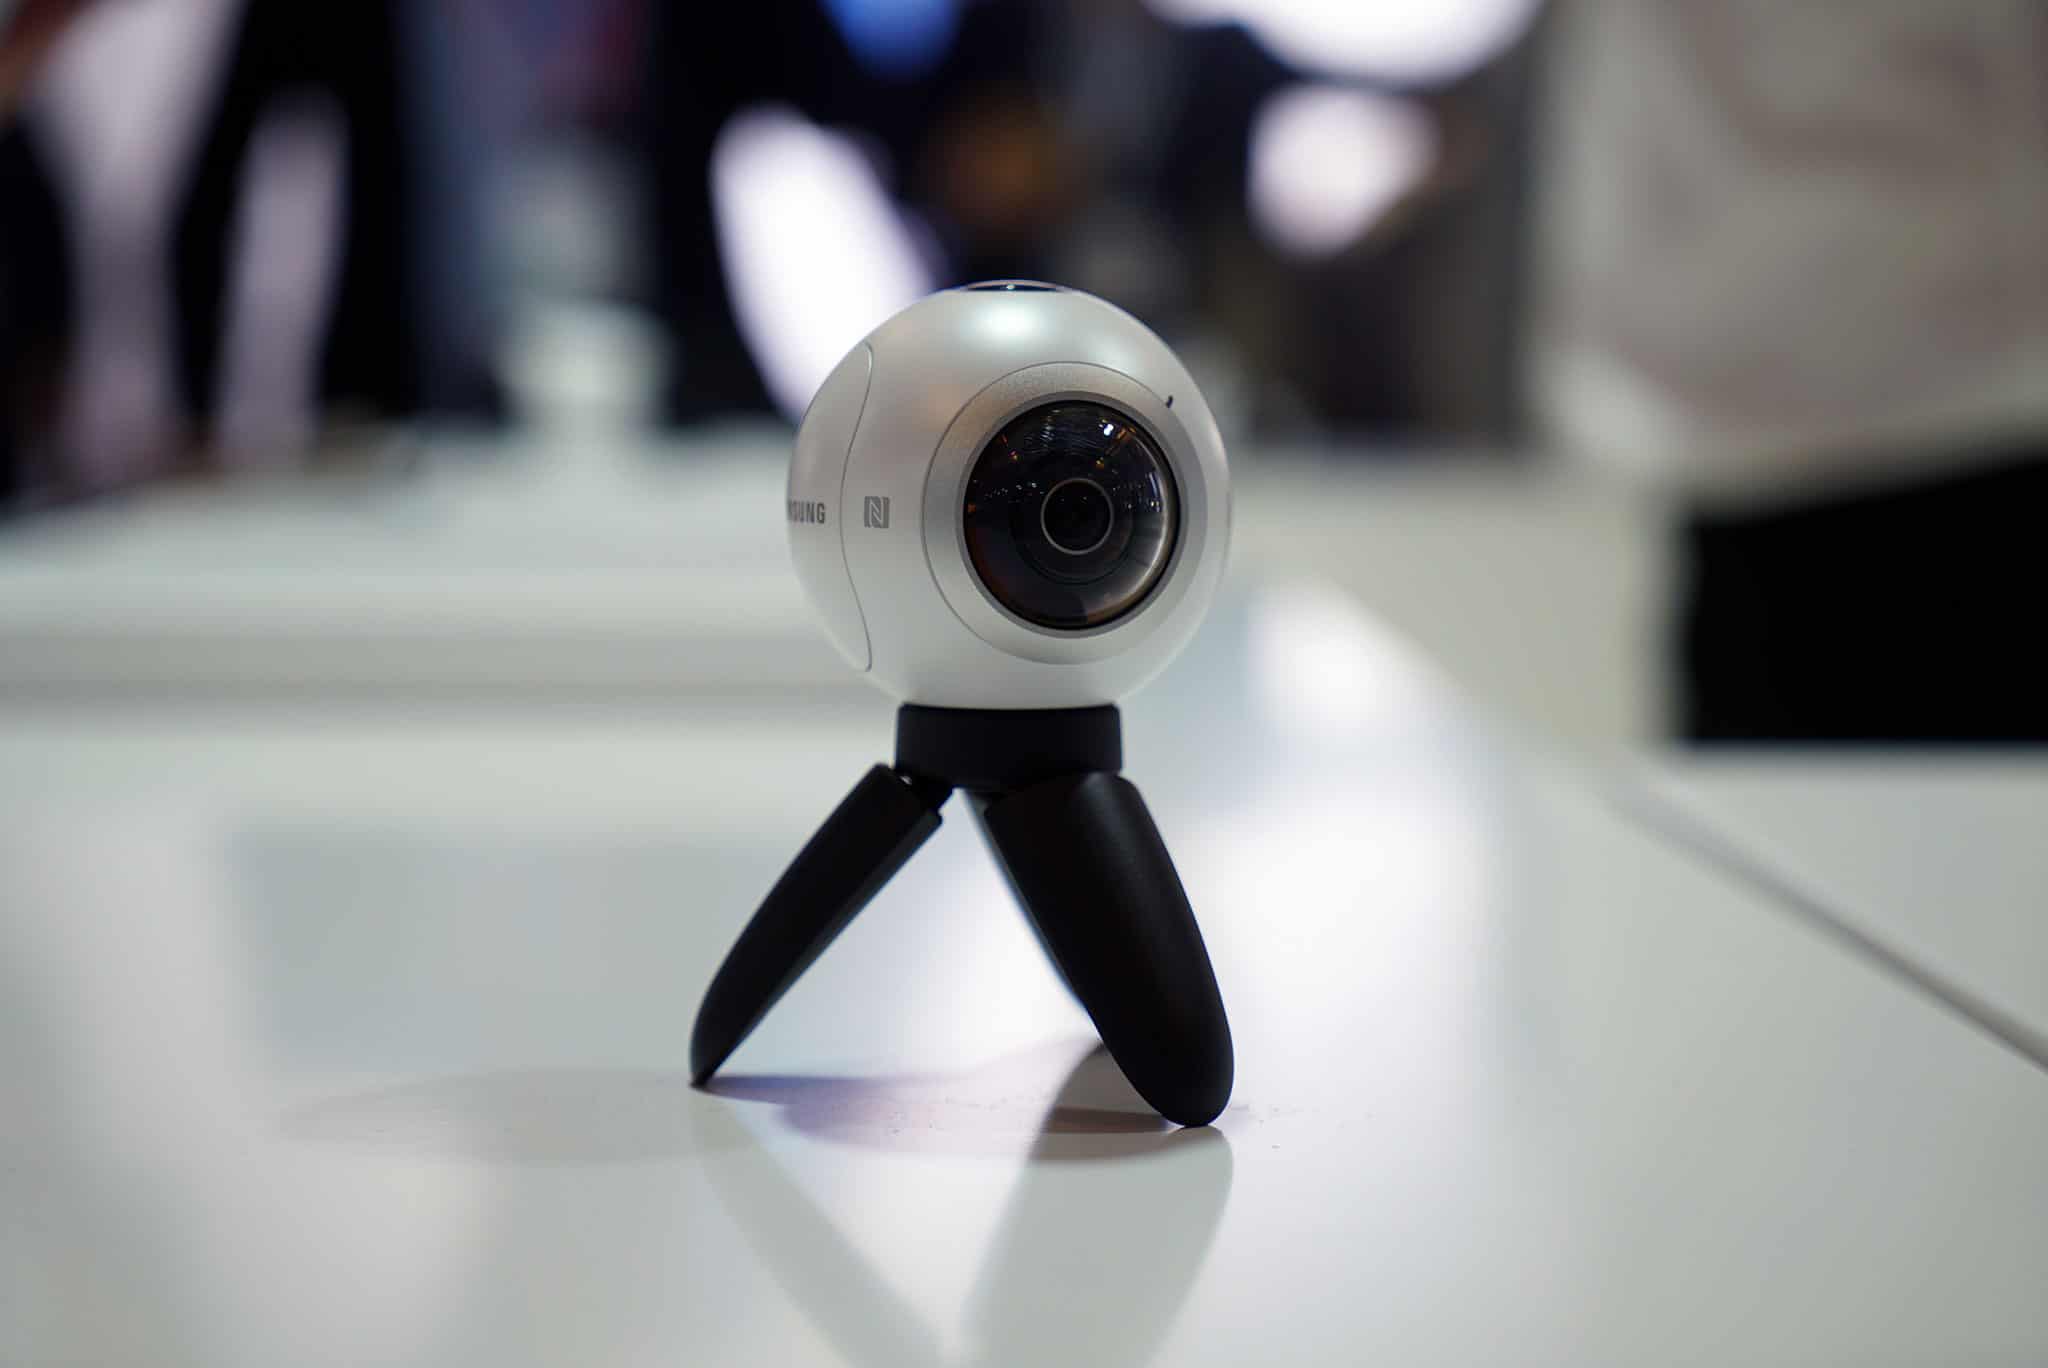 Samsung's Gear 360 camera brings 360 video to the masses